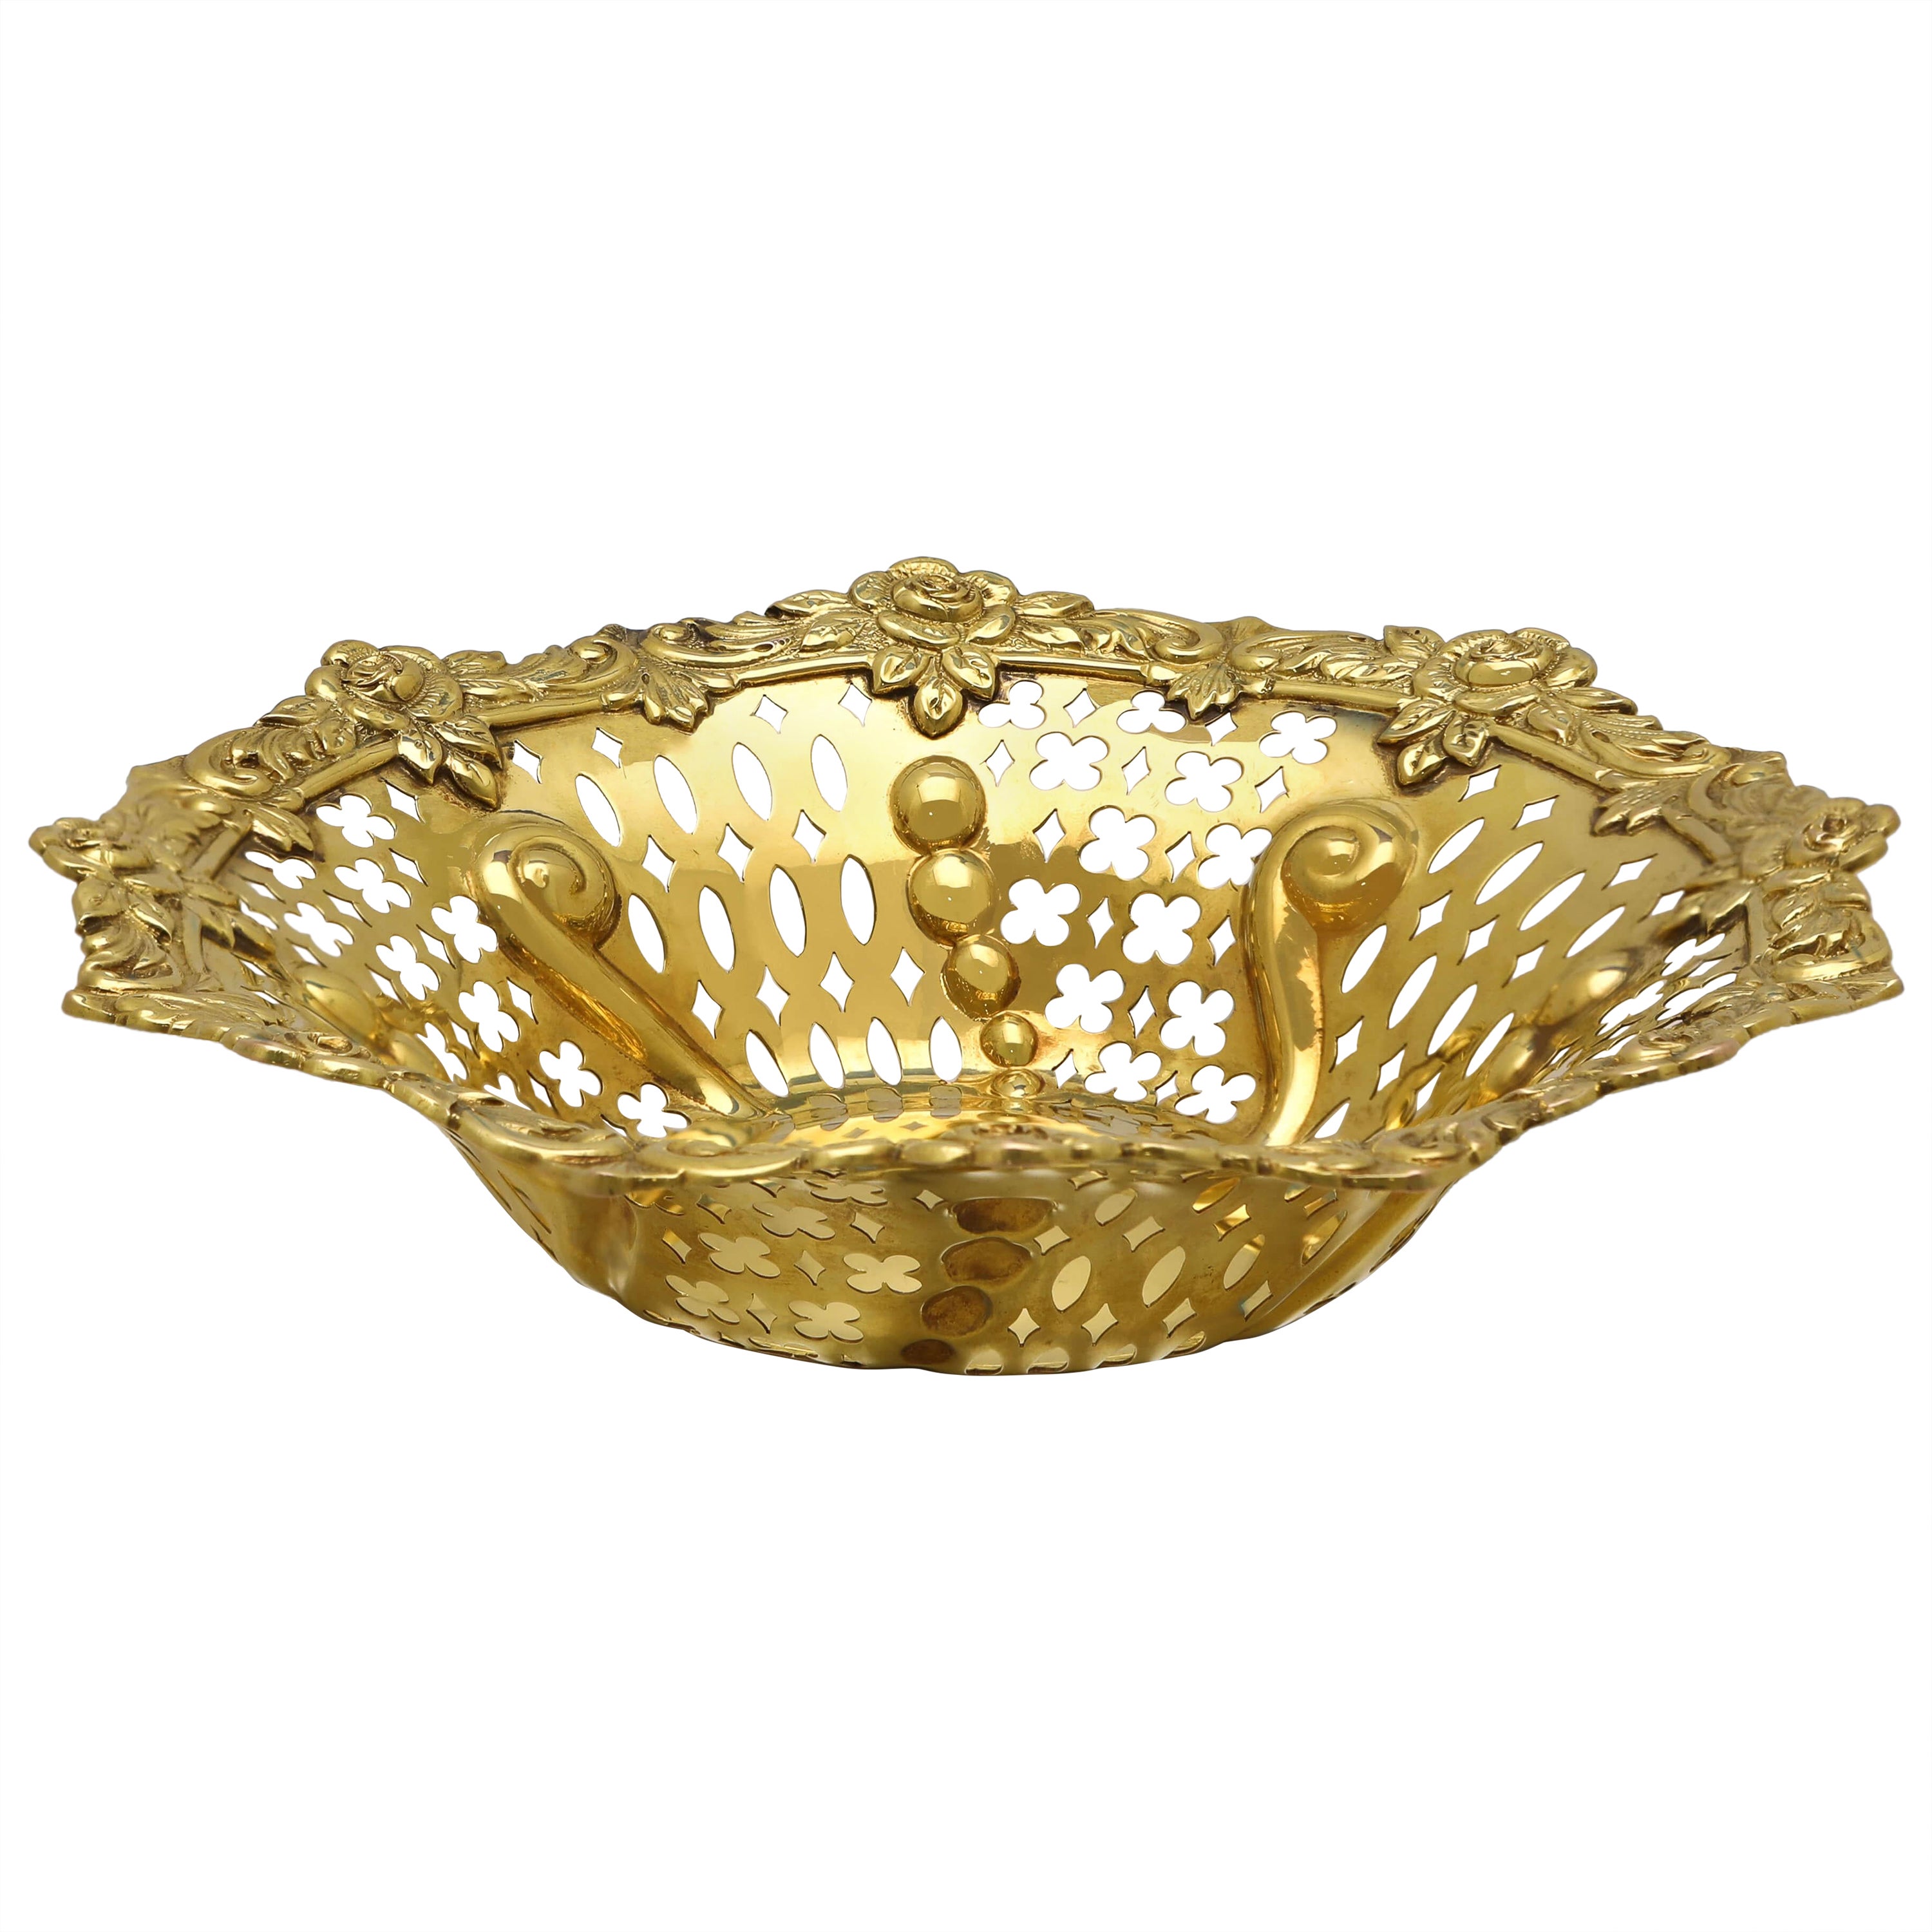 A very rare Edwardian 9ct gold dish by Mappin & Webb - London 1903 - 142.4g